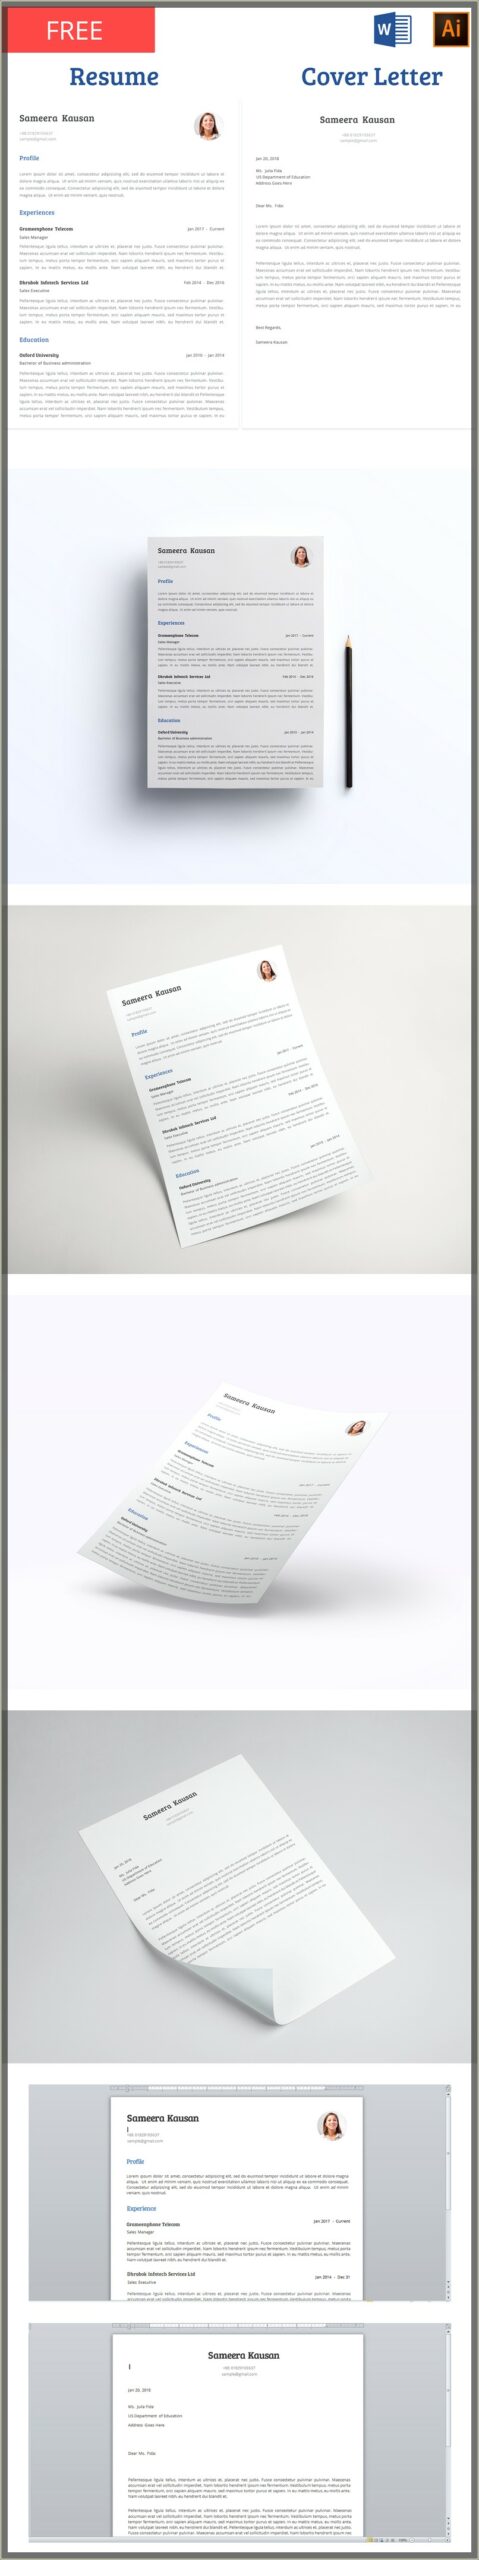 Basic Resume And Cover Letter Templates